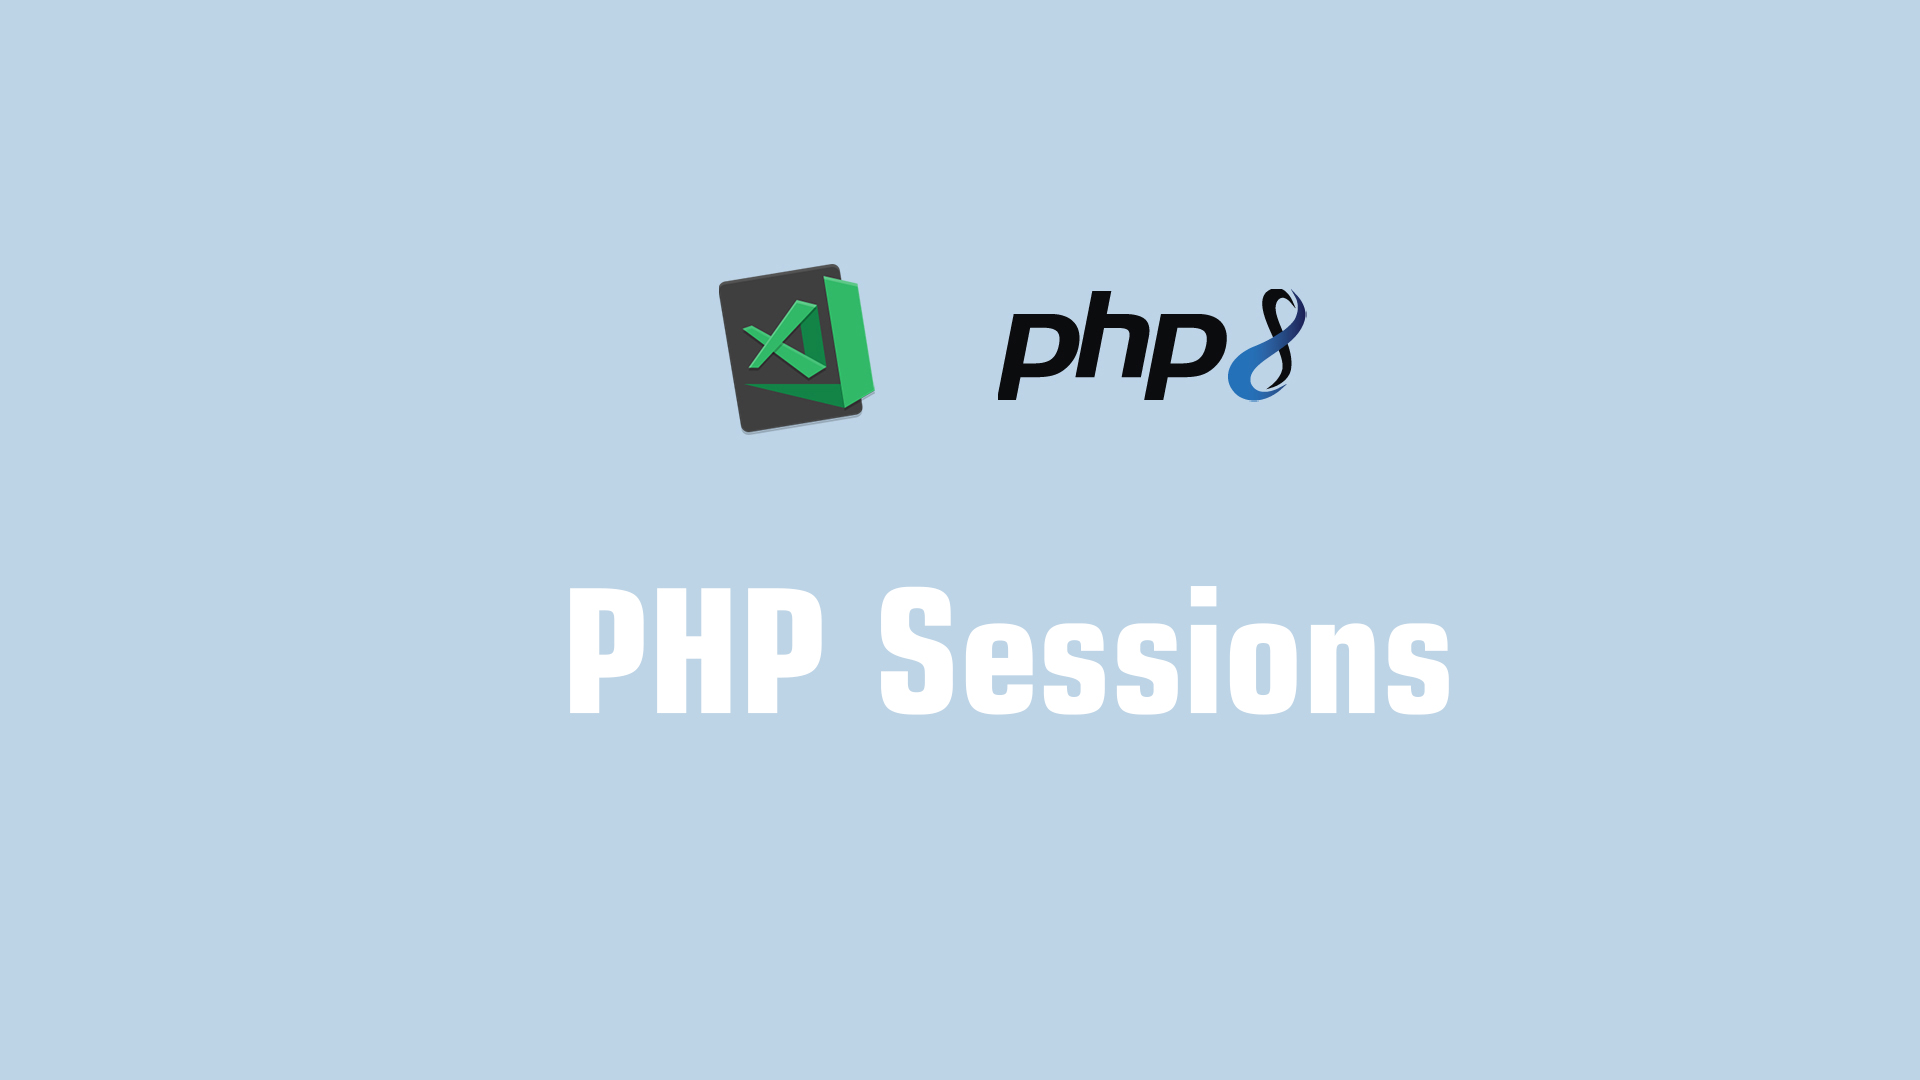 New start session. Сортировки php. Php array. Session php. In_array php.